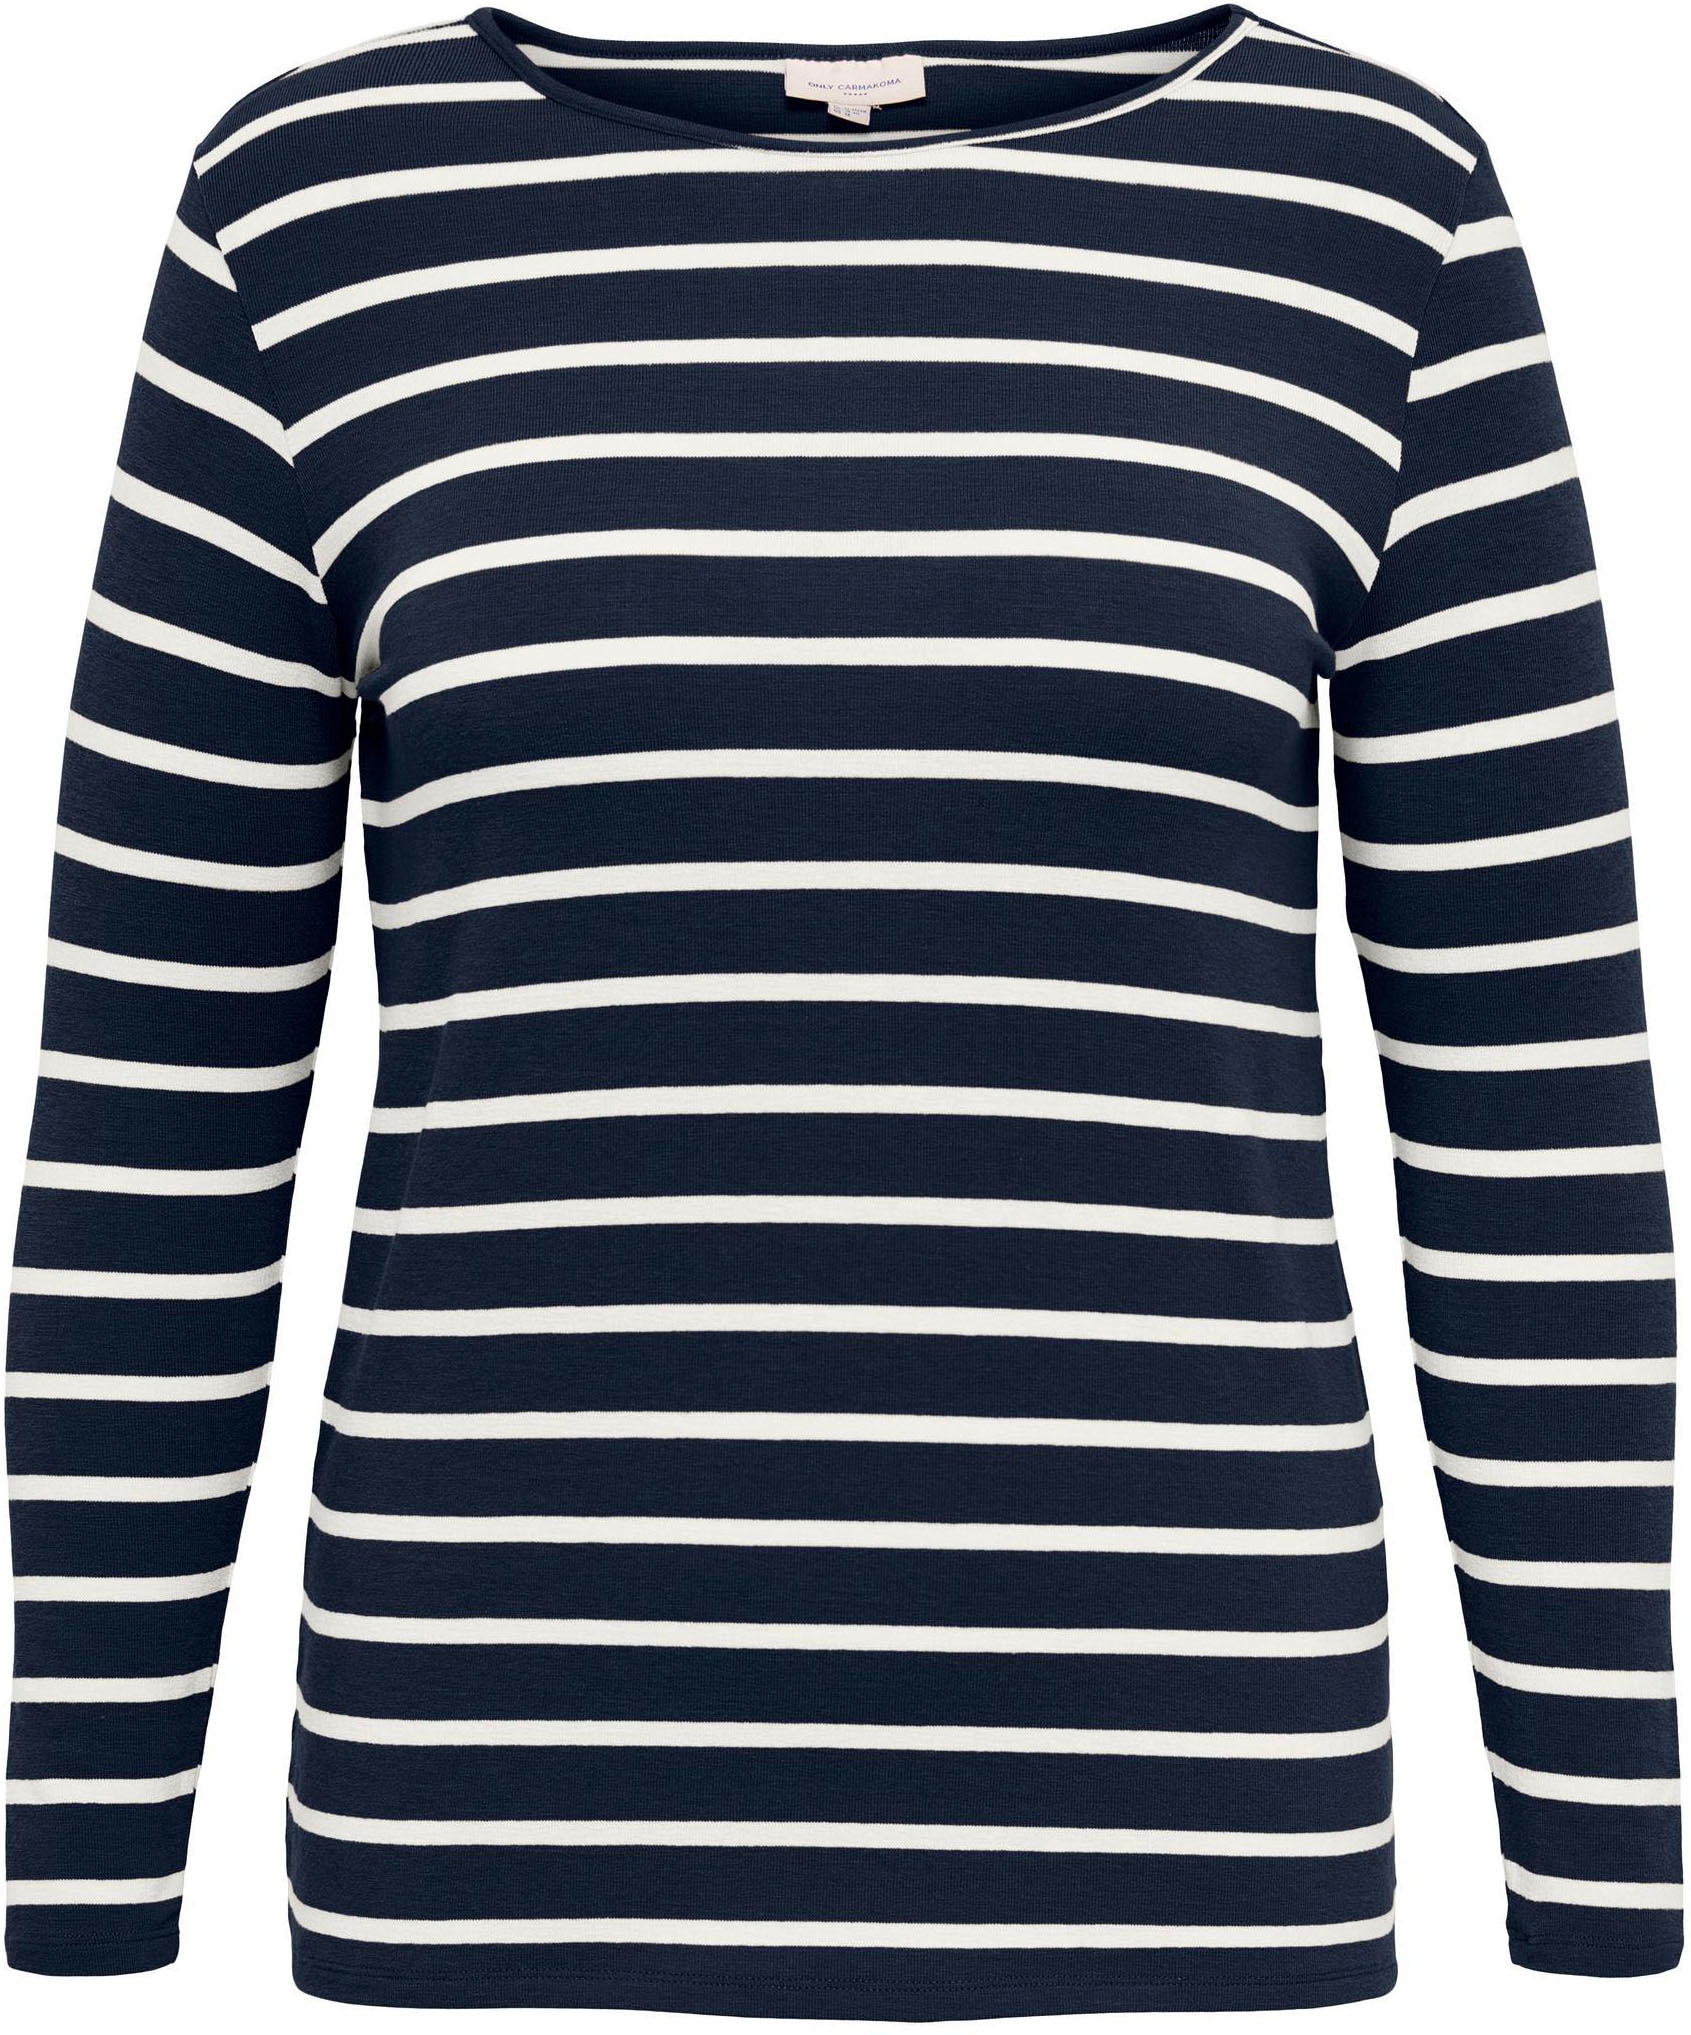 L/S CARMAKOMA Langarmshirt ONLY OTTO JRS« online TOP »CARELKE bei